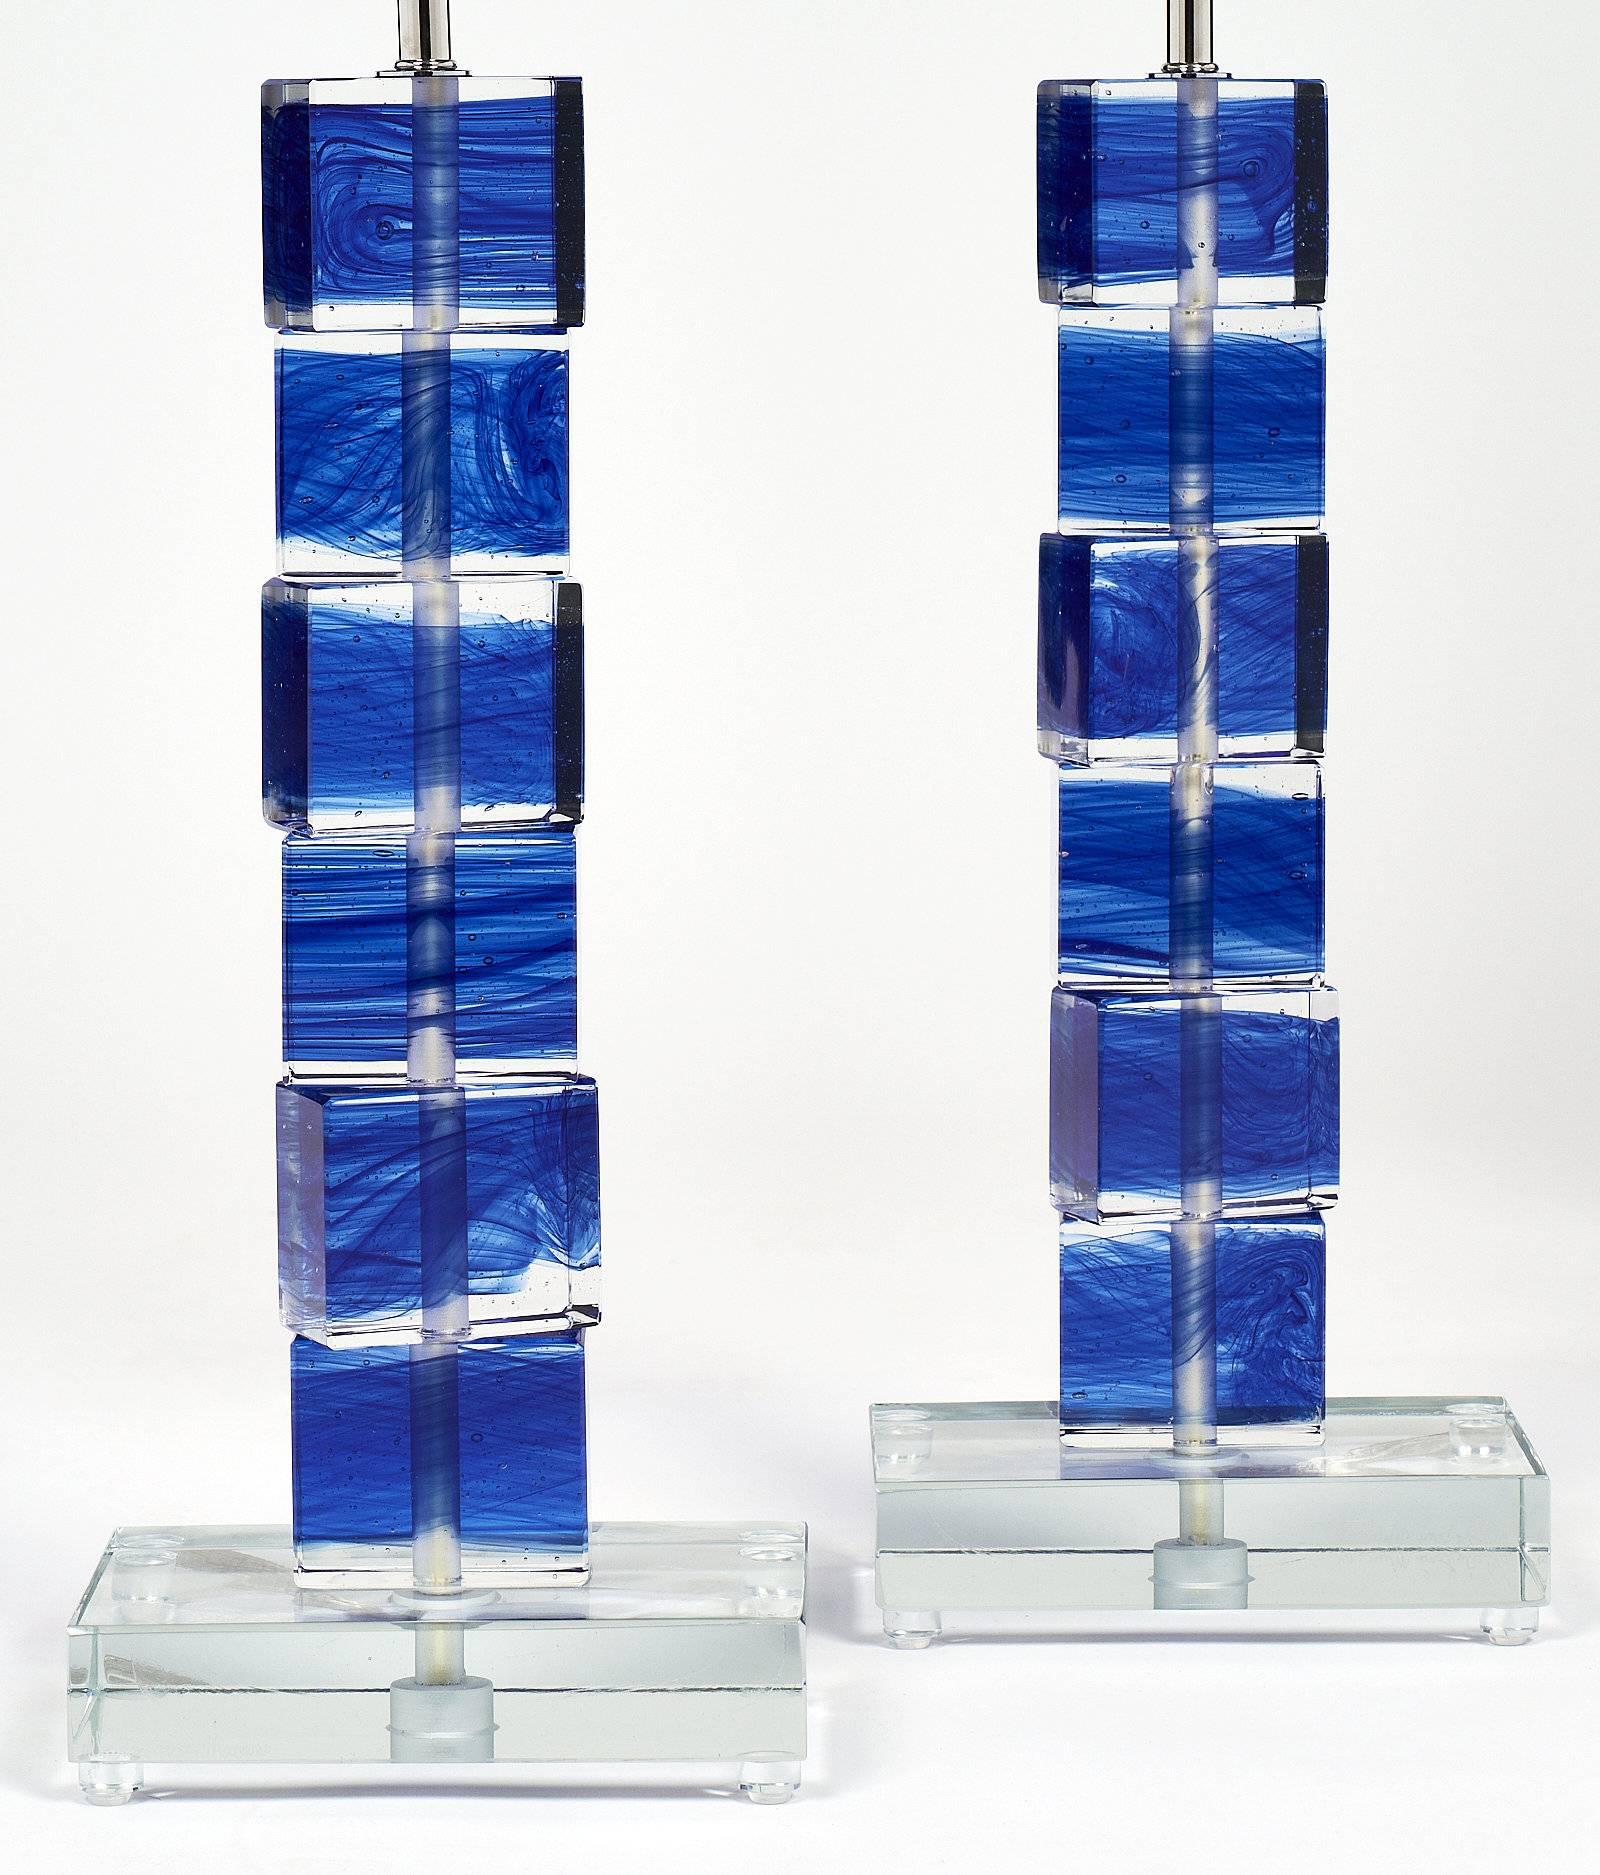 Unique pair of Murano glass cobalt blue lamps. Each features stacked clear glass cubic elements with blue color fused in the blocks. They sit on a clear glass base. These lamps have been newly wired to fit US standards.

This pair is currently